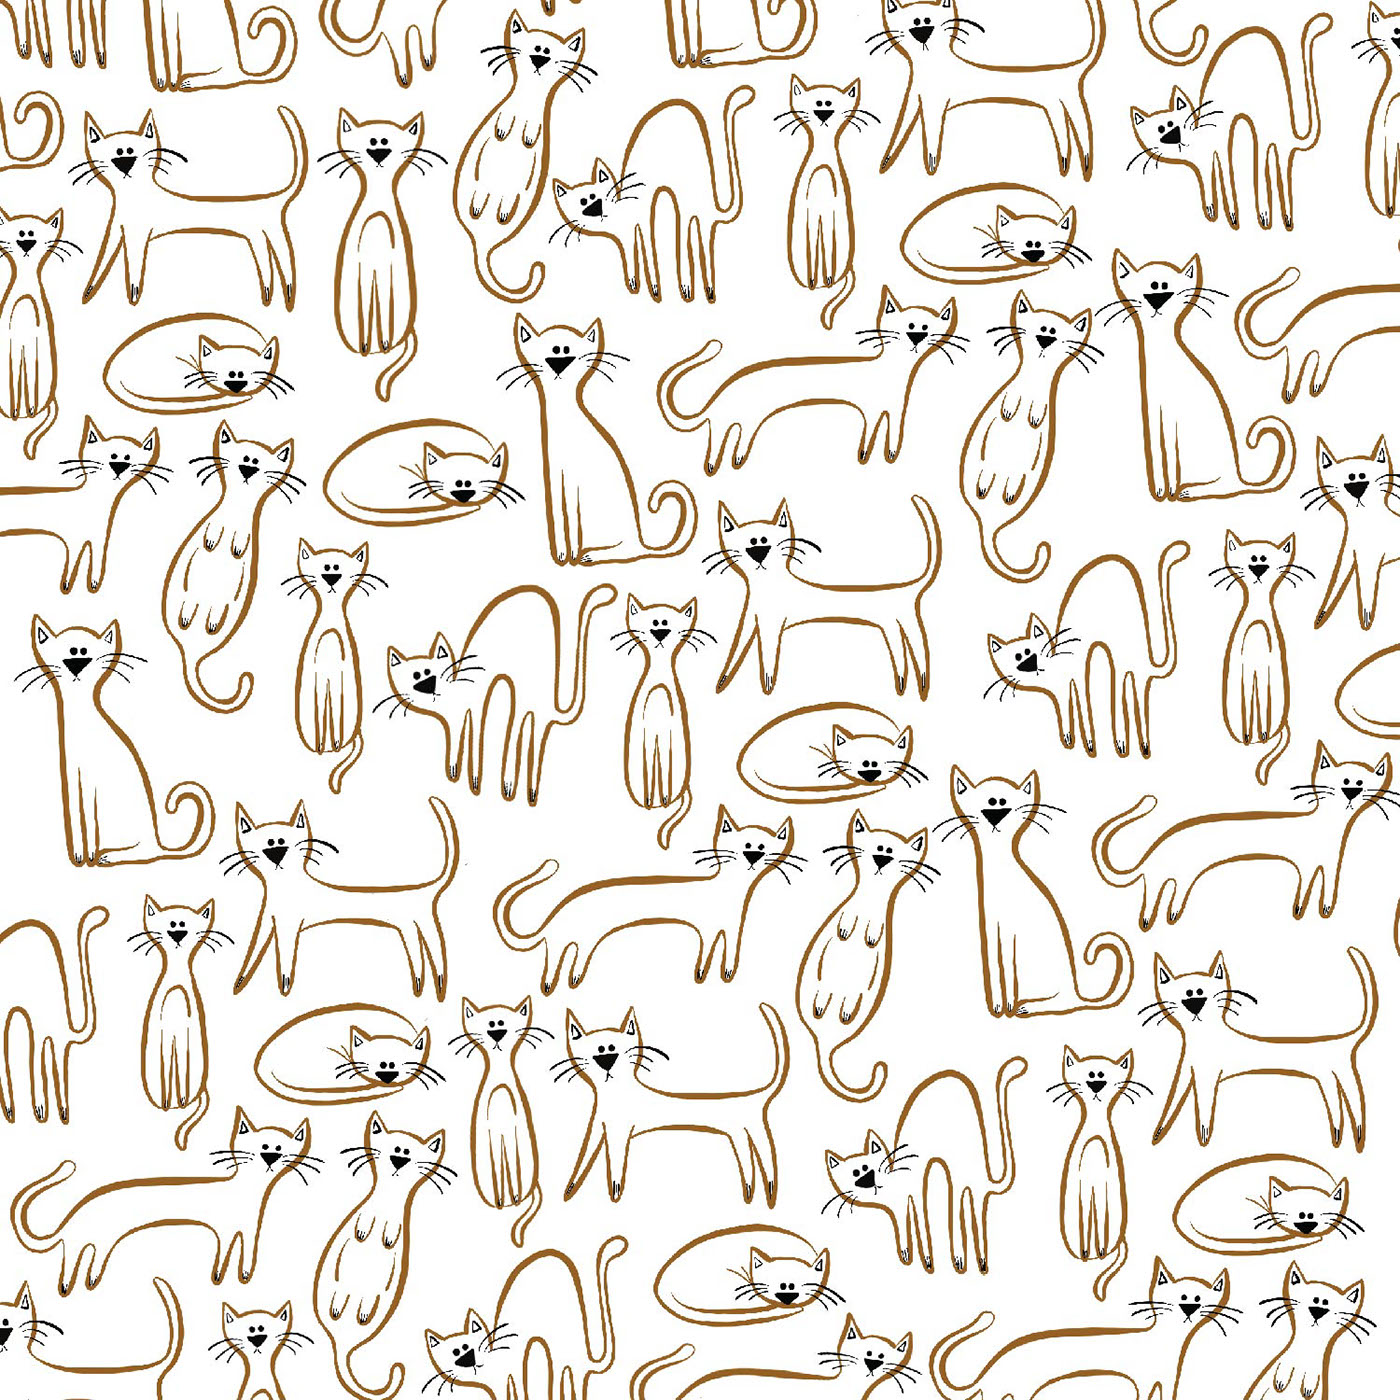 Cat kitty meow ILLUSTRATION  pattern surface design fabric design line drawing